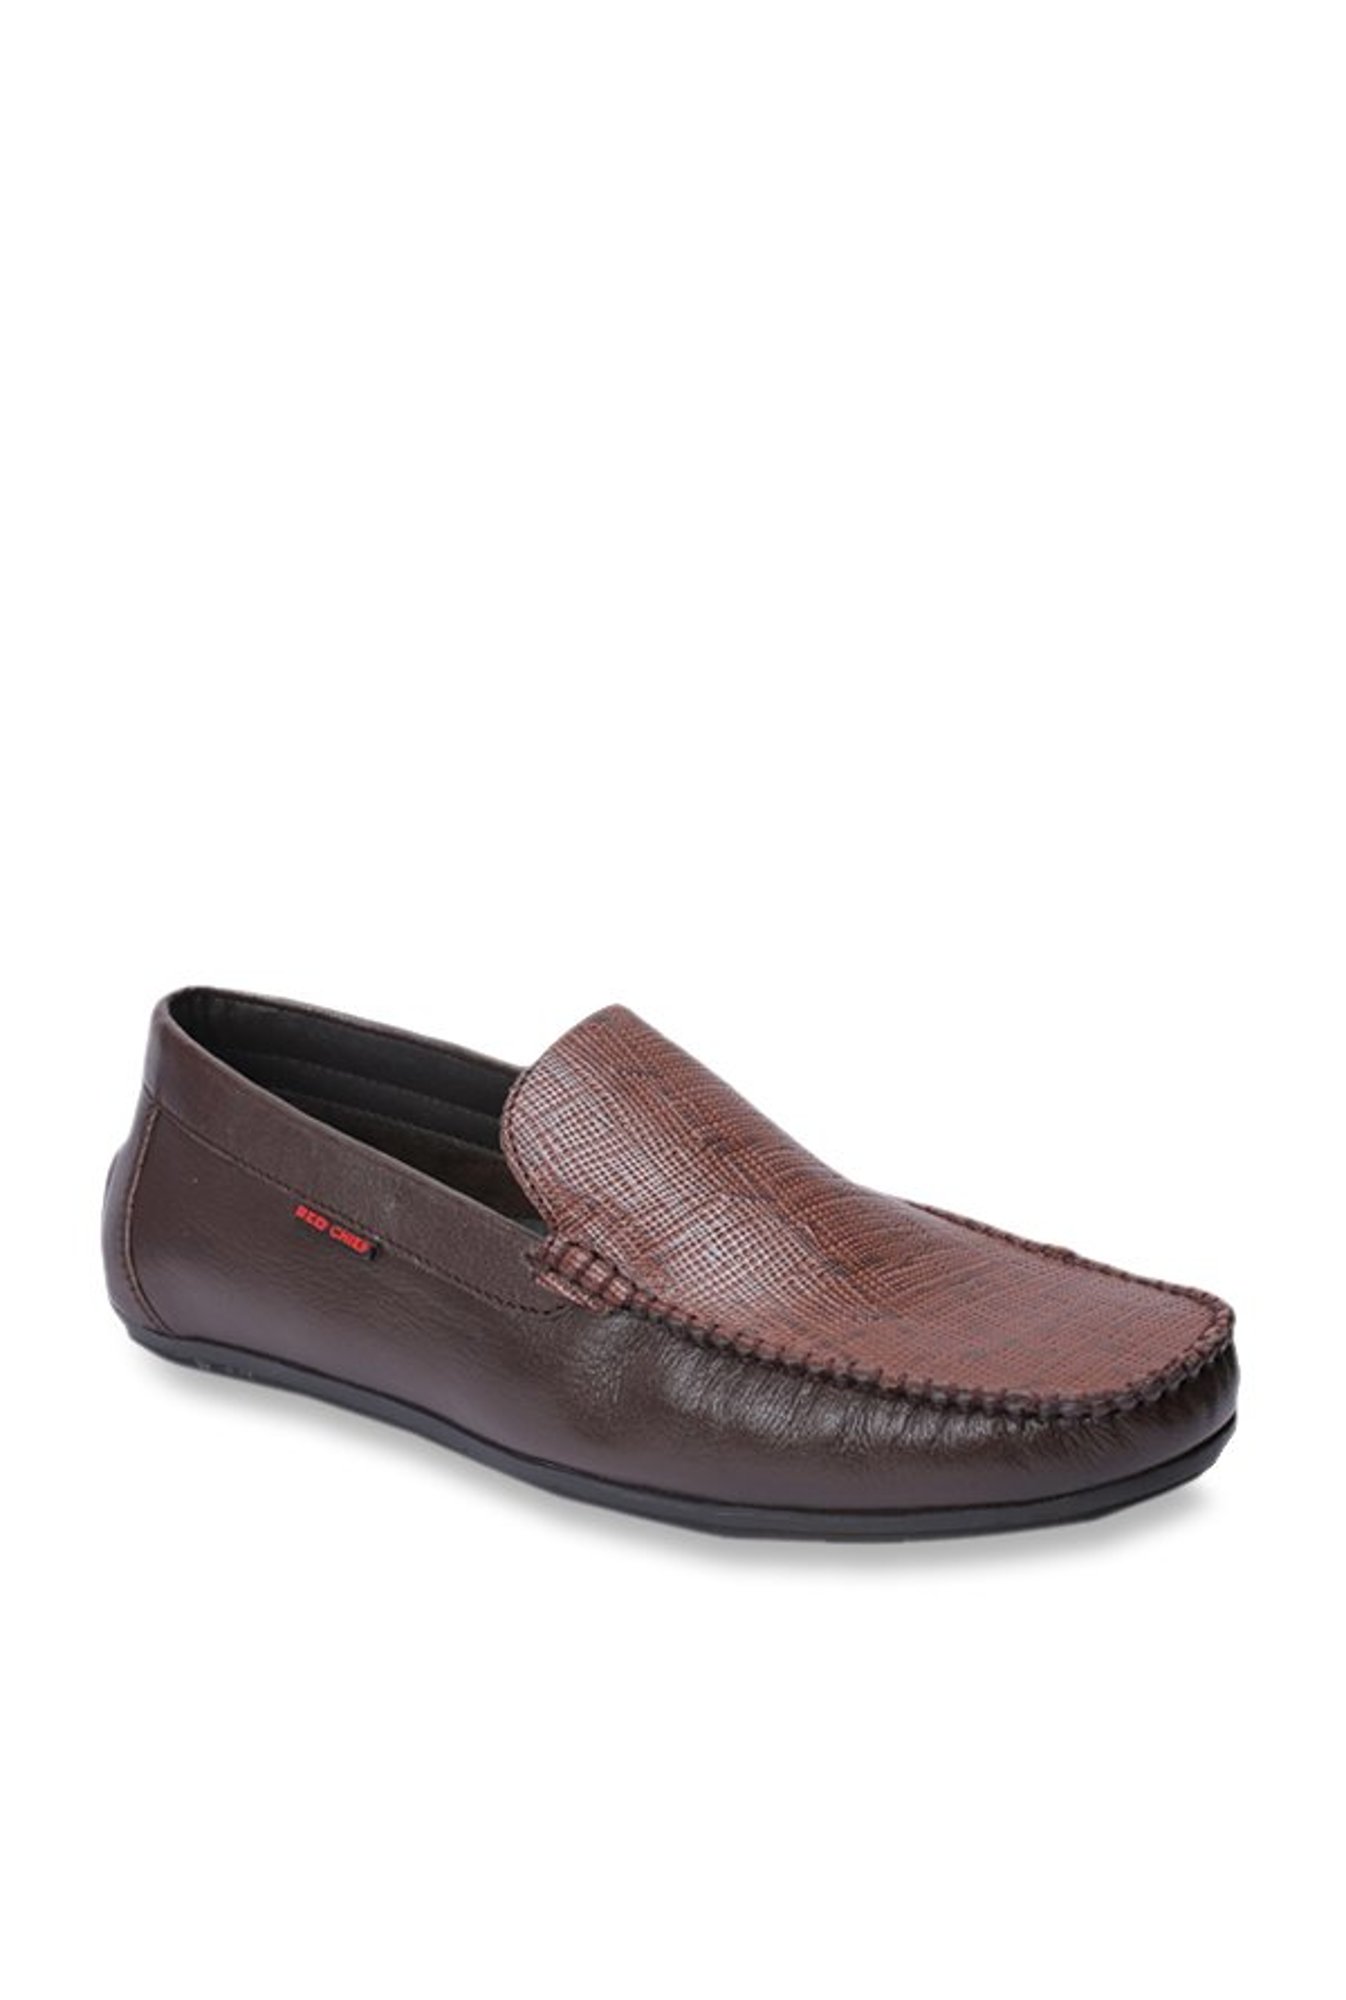 red chief loafer shoes